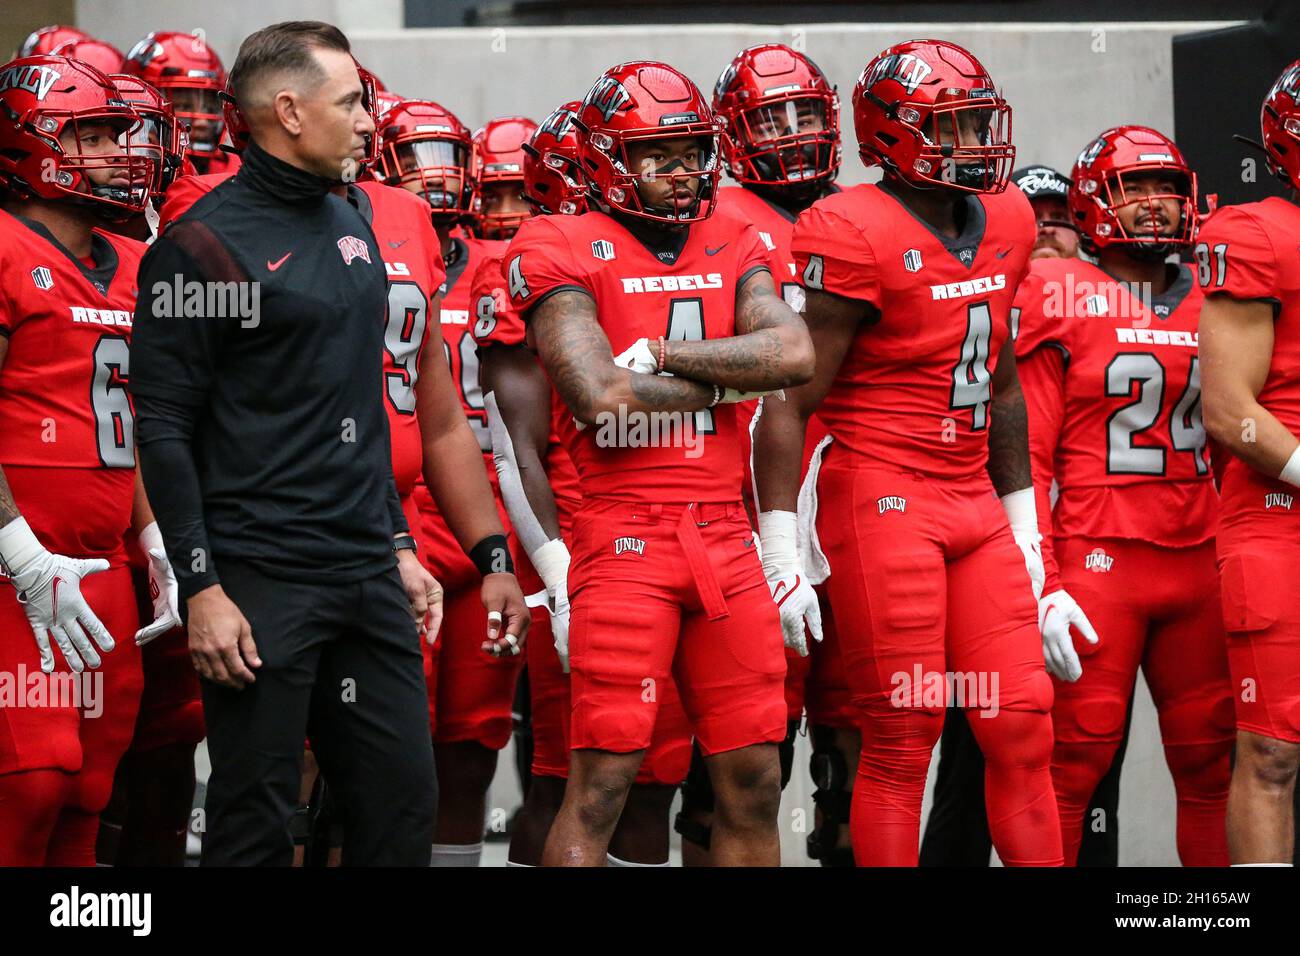 Las Vegas, NV, USA. 16th Oct, 2021. The UNLV Rebels team waits to be introduced prior to the start of the NCAA football game featuring the Utah State Aggies and the UNLV Rebels at Allegiant Stadium in Las Vegas, NV. Christopher Trim/CSM/Alamy Live News Stock Photo